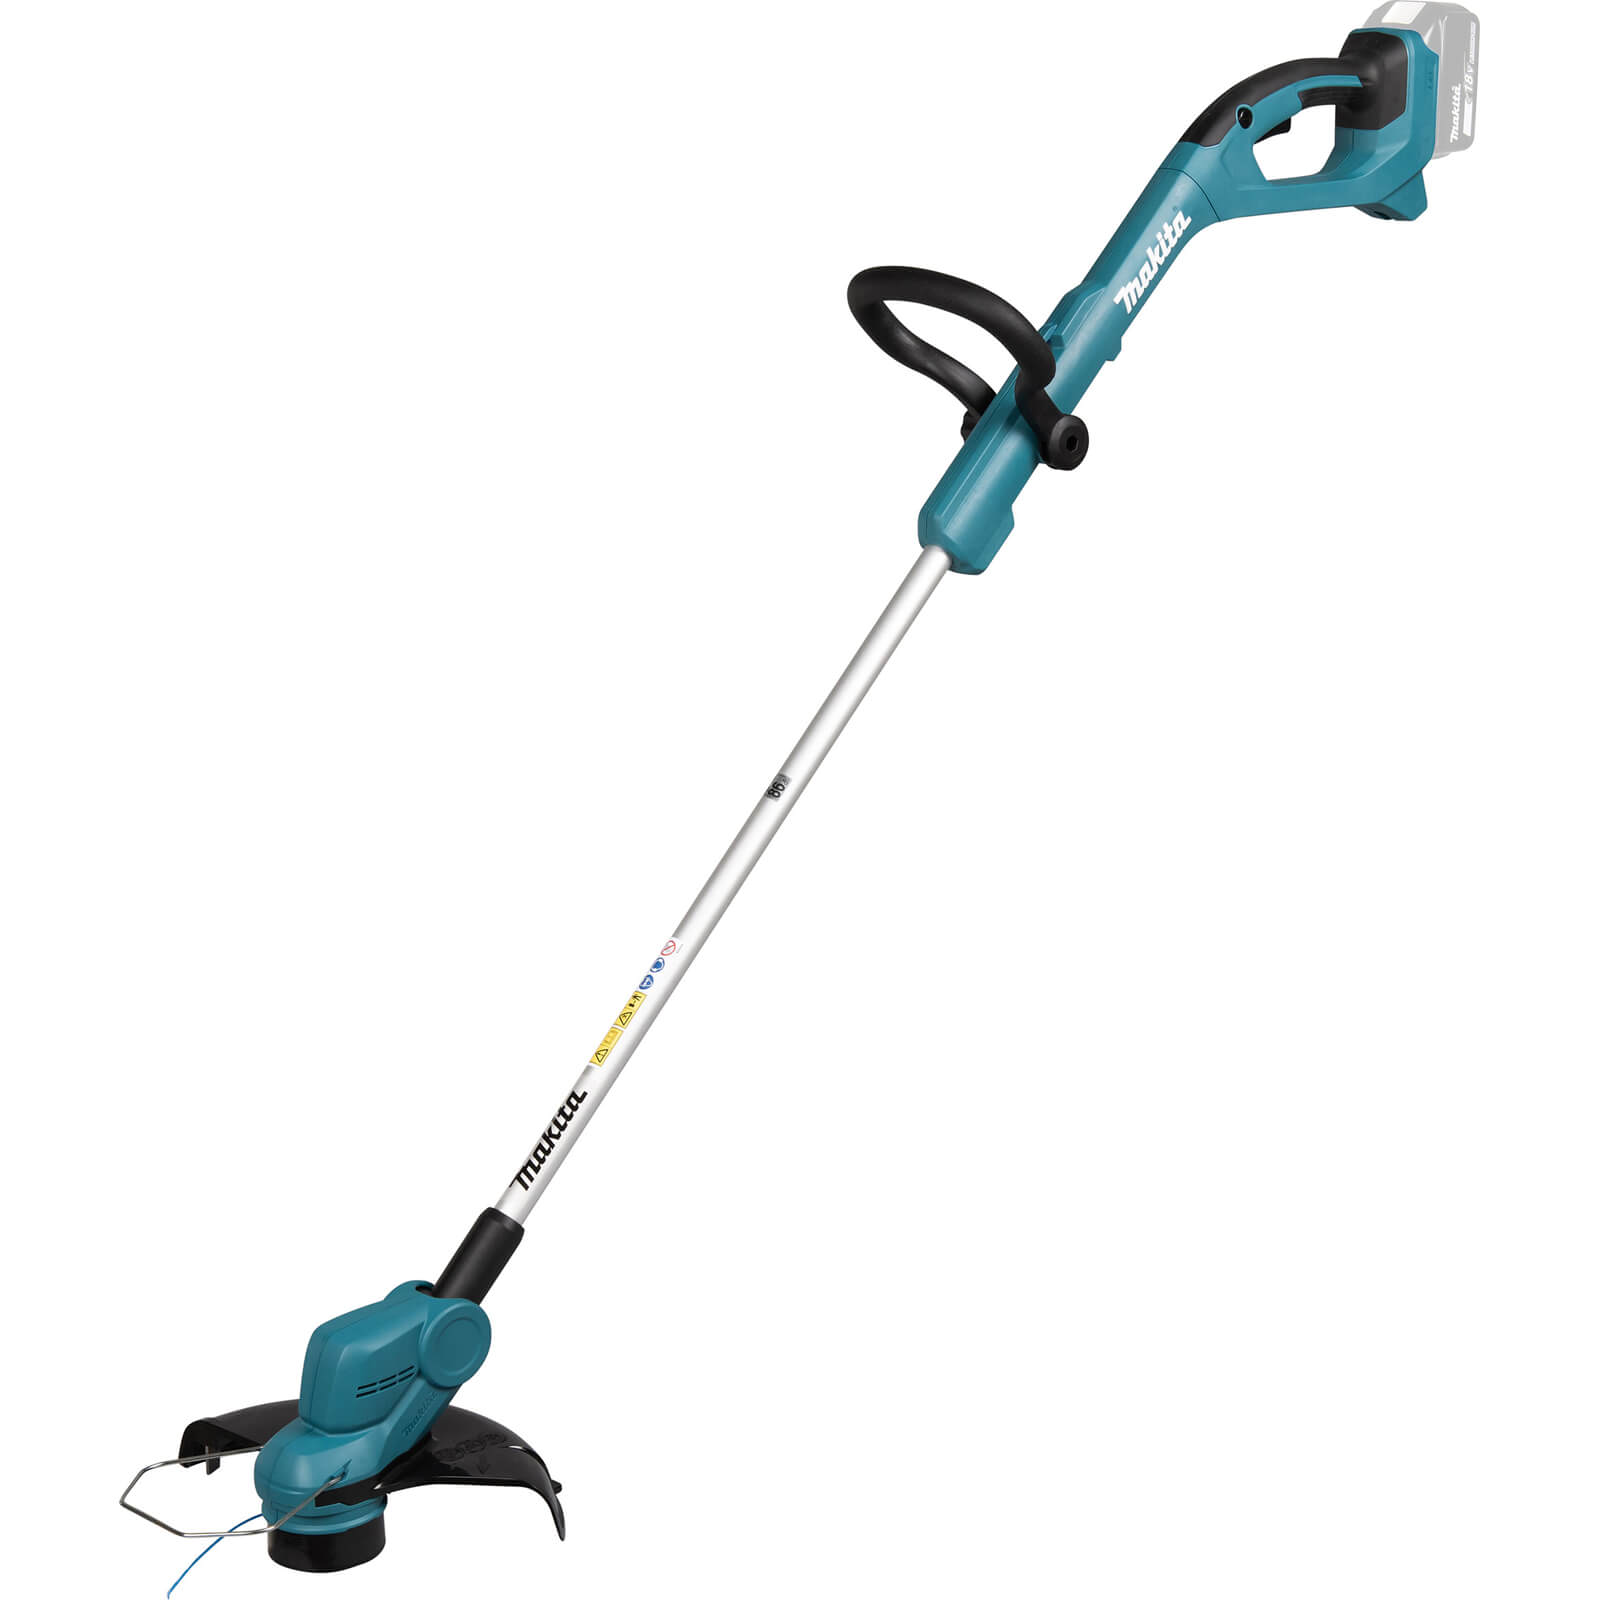 Image of Makita DUR193 18v LXT Cordless Grass Trimmer 260mm No Batteries No Charger